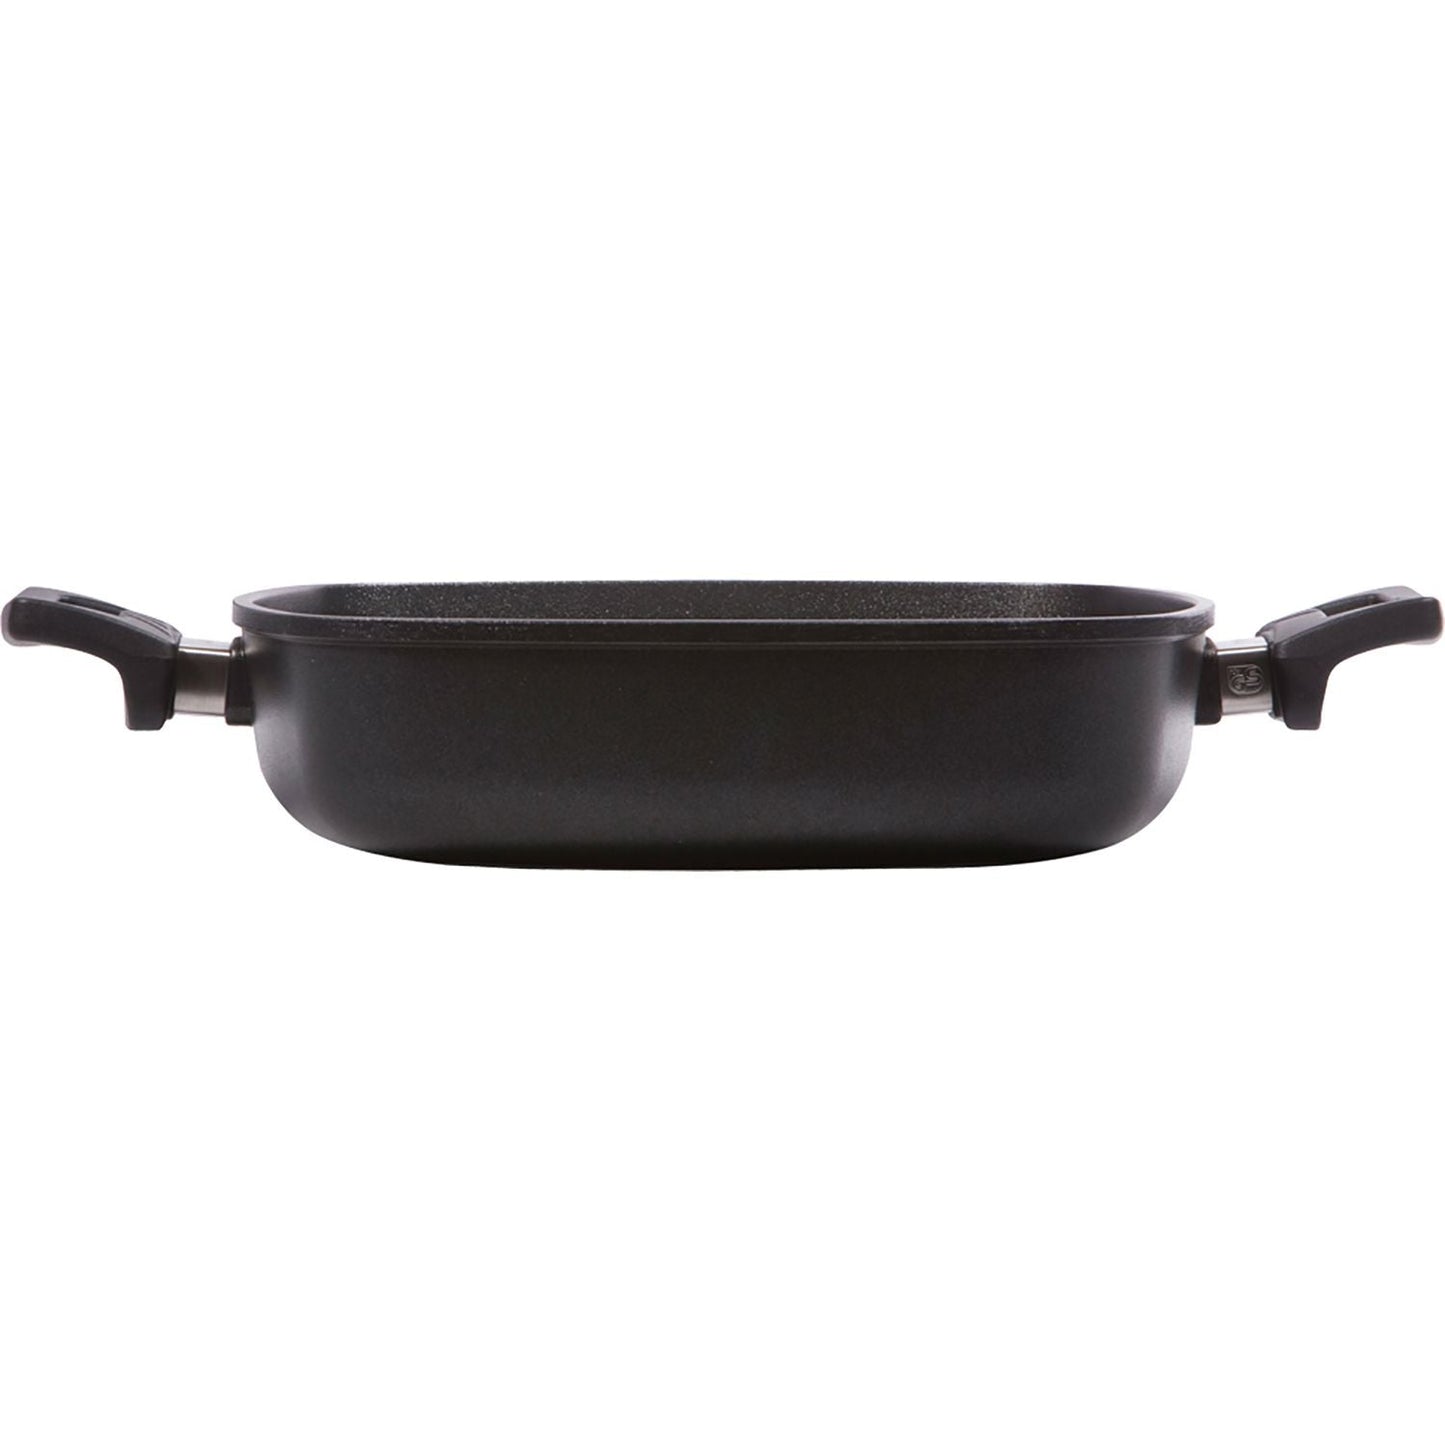 Eurolux Premium casserole dish 28 x 28 cm, 7 cm H, 4.0 L - Suitable for Induction, Made in Germany